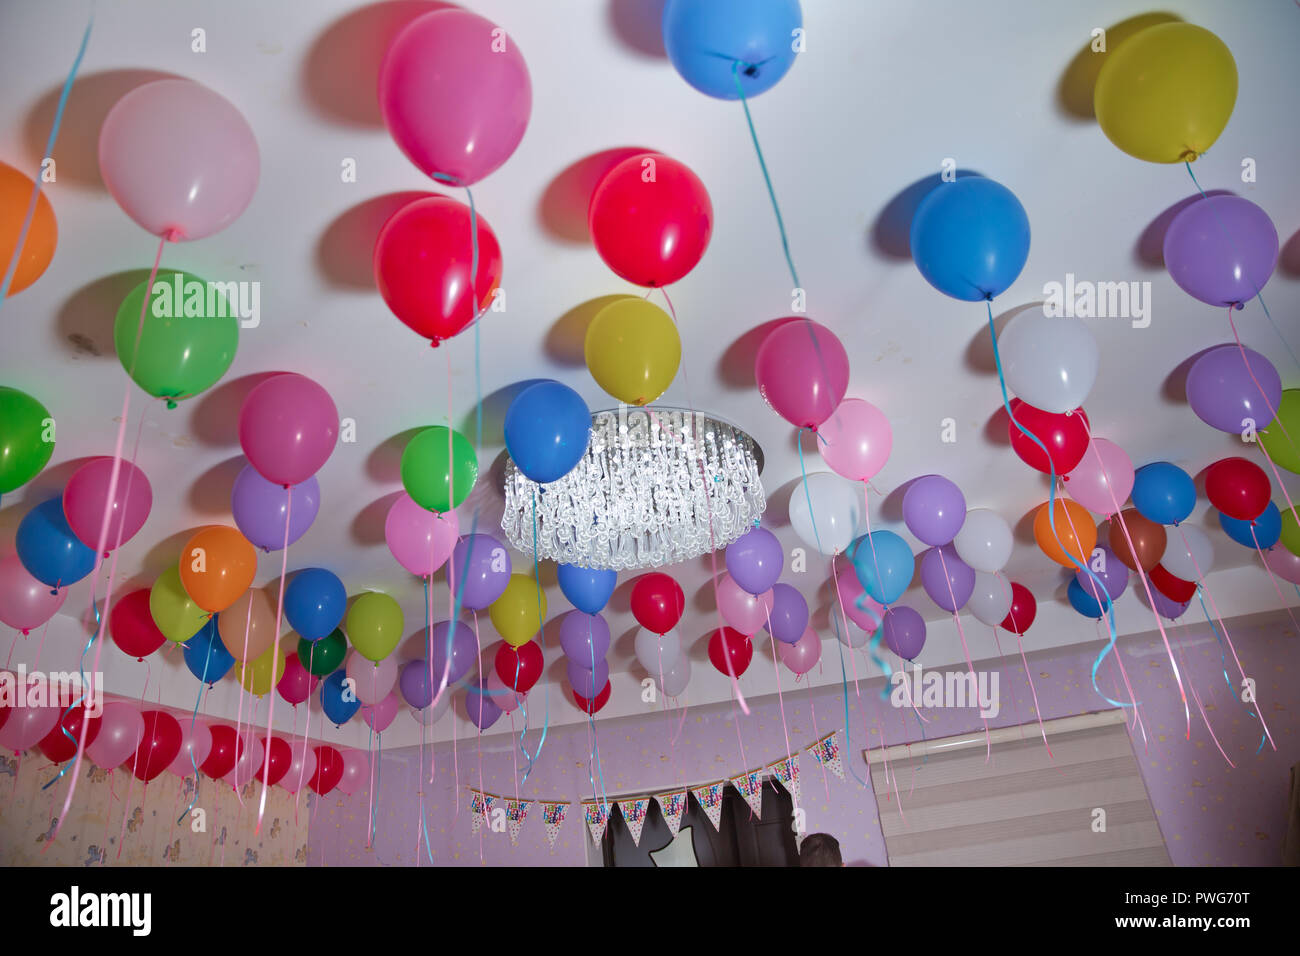 Helium Balloons Colorfull Balloons Float On The White Ceiling In